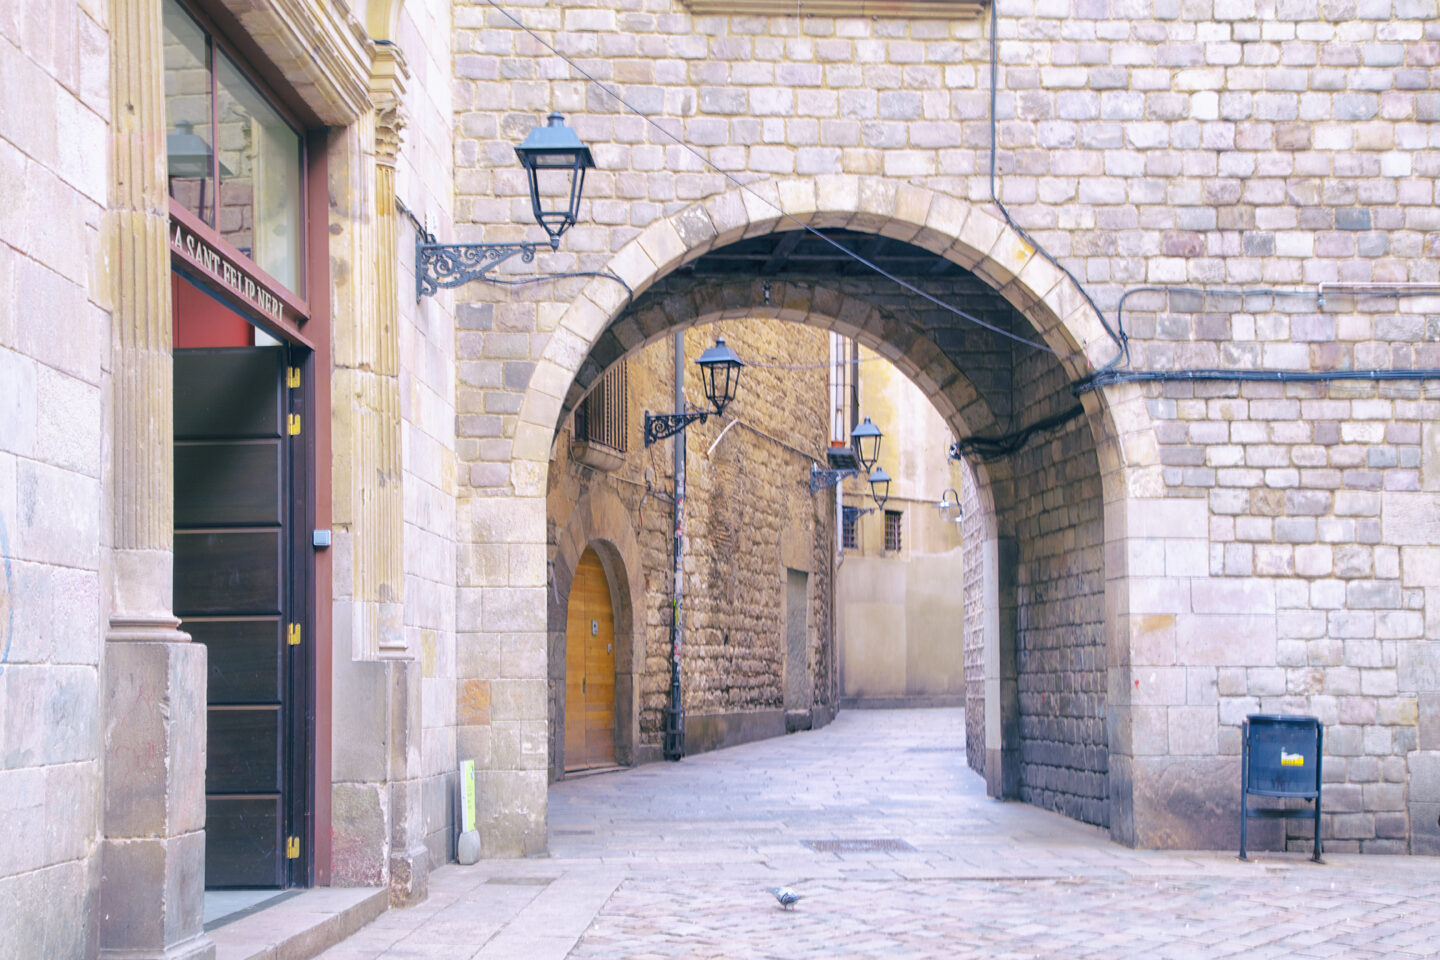 Archway and lanterns in the Gothic Quarter of beautiful Barcelona Spain